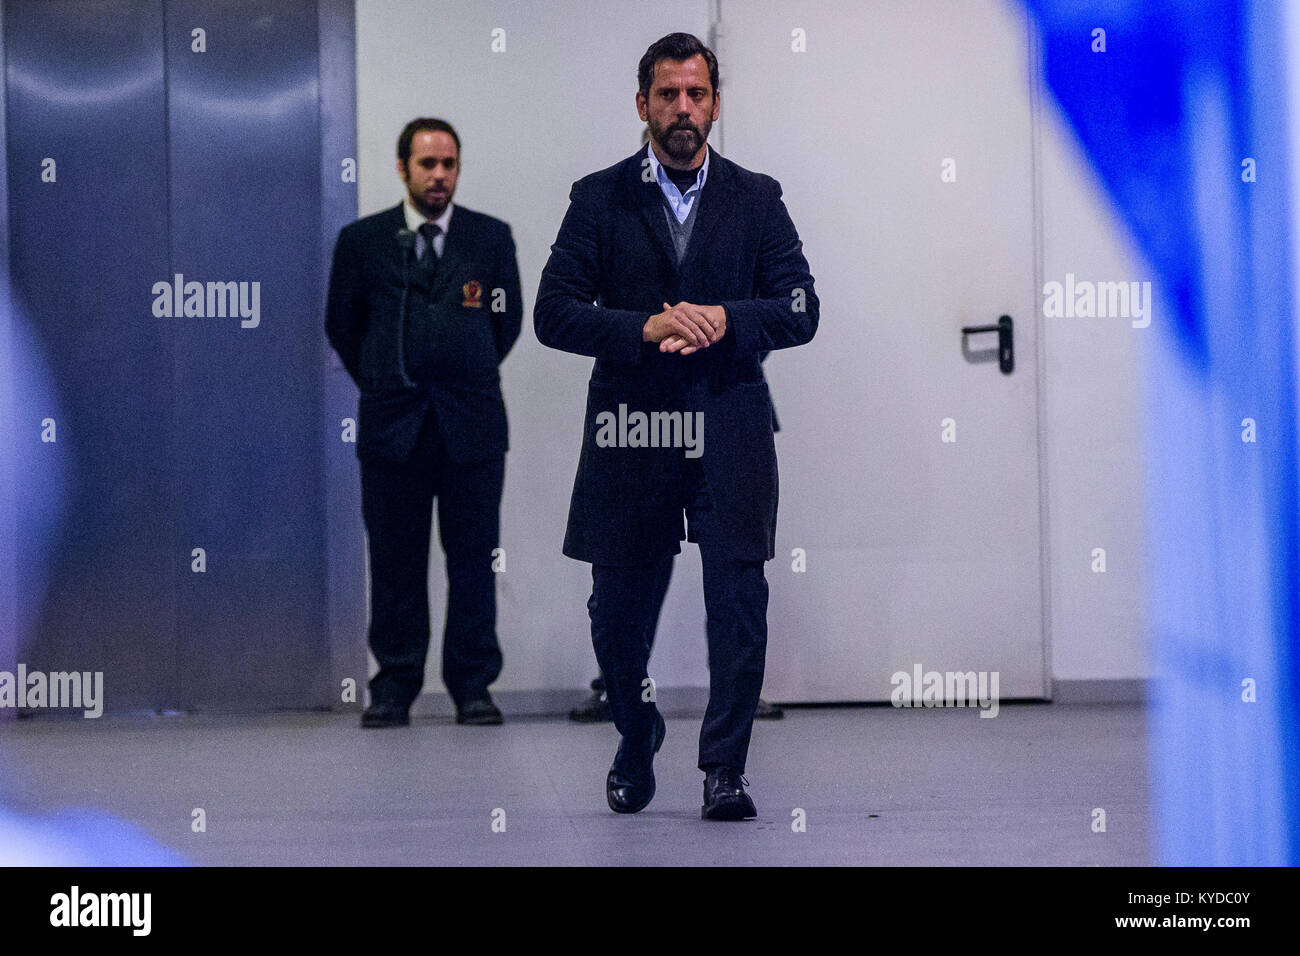 RCD Espanyol coach Quique Sanchez Flores during the match between RCD Espanyol v Athletic Club, for the round 19 of the Liga Santander, played at RCDE Stadium on 14th January 2018 in Barcelona, Spain. Stock Photo